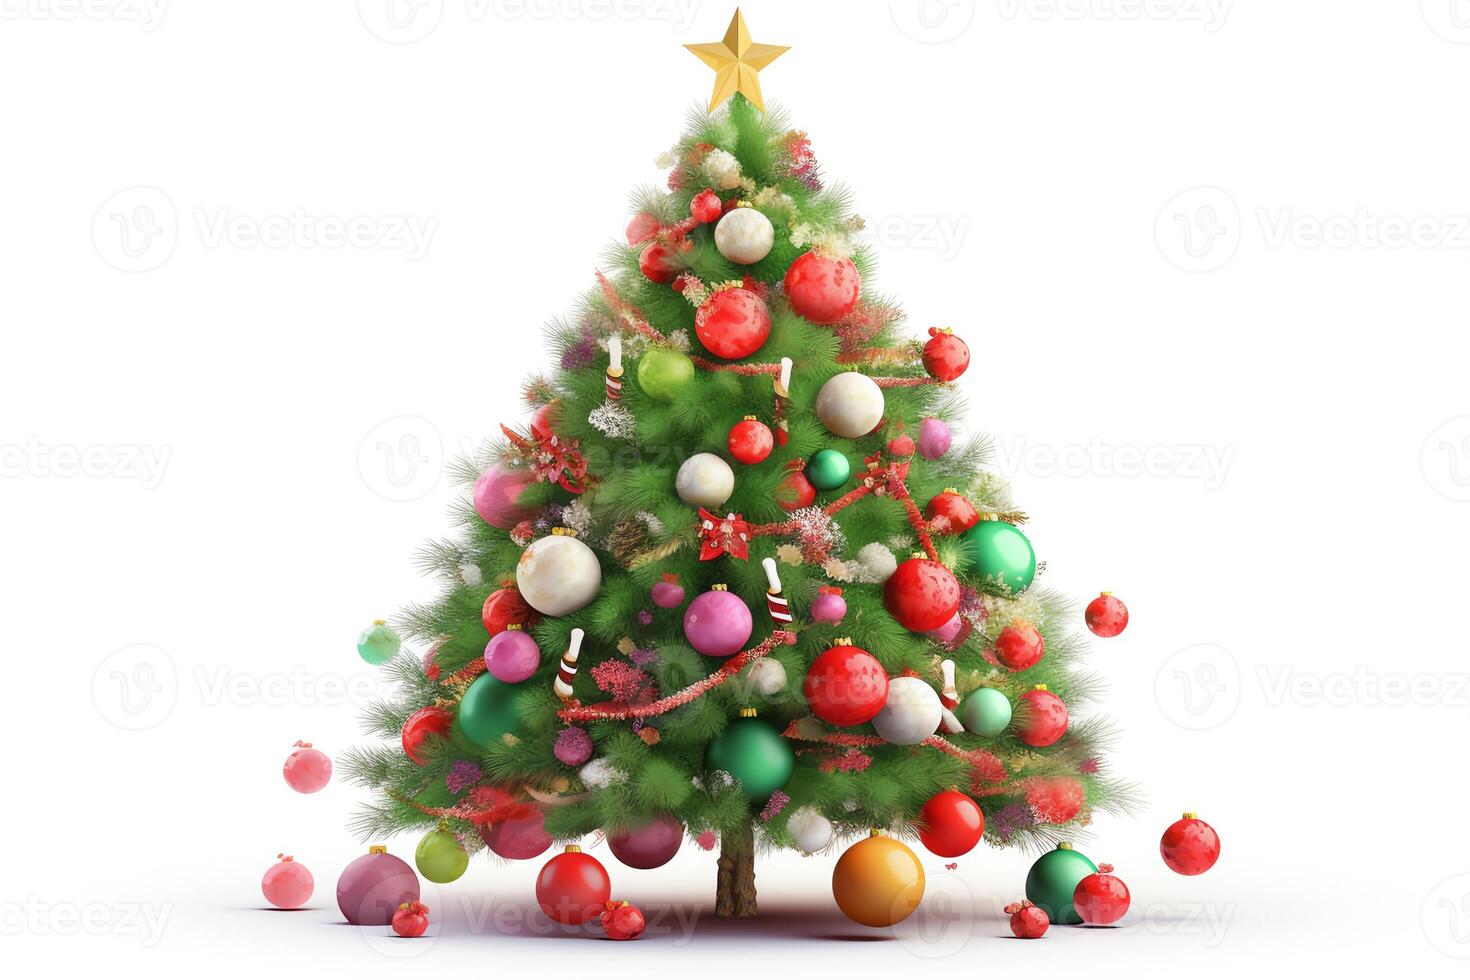 Isolated Christmas Tree With Balls And Decorations On White Background. Christmas Eve. photo